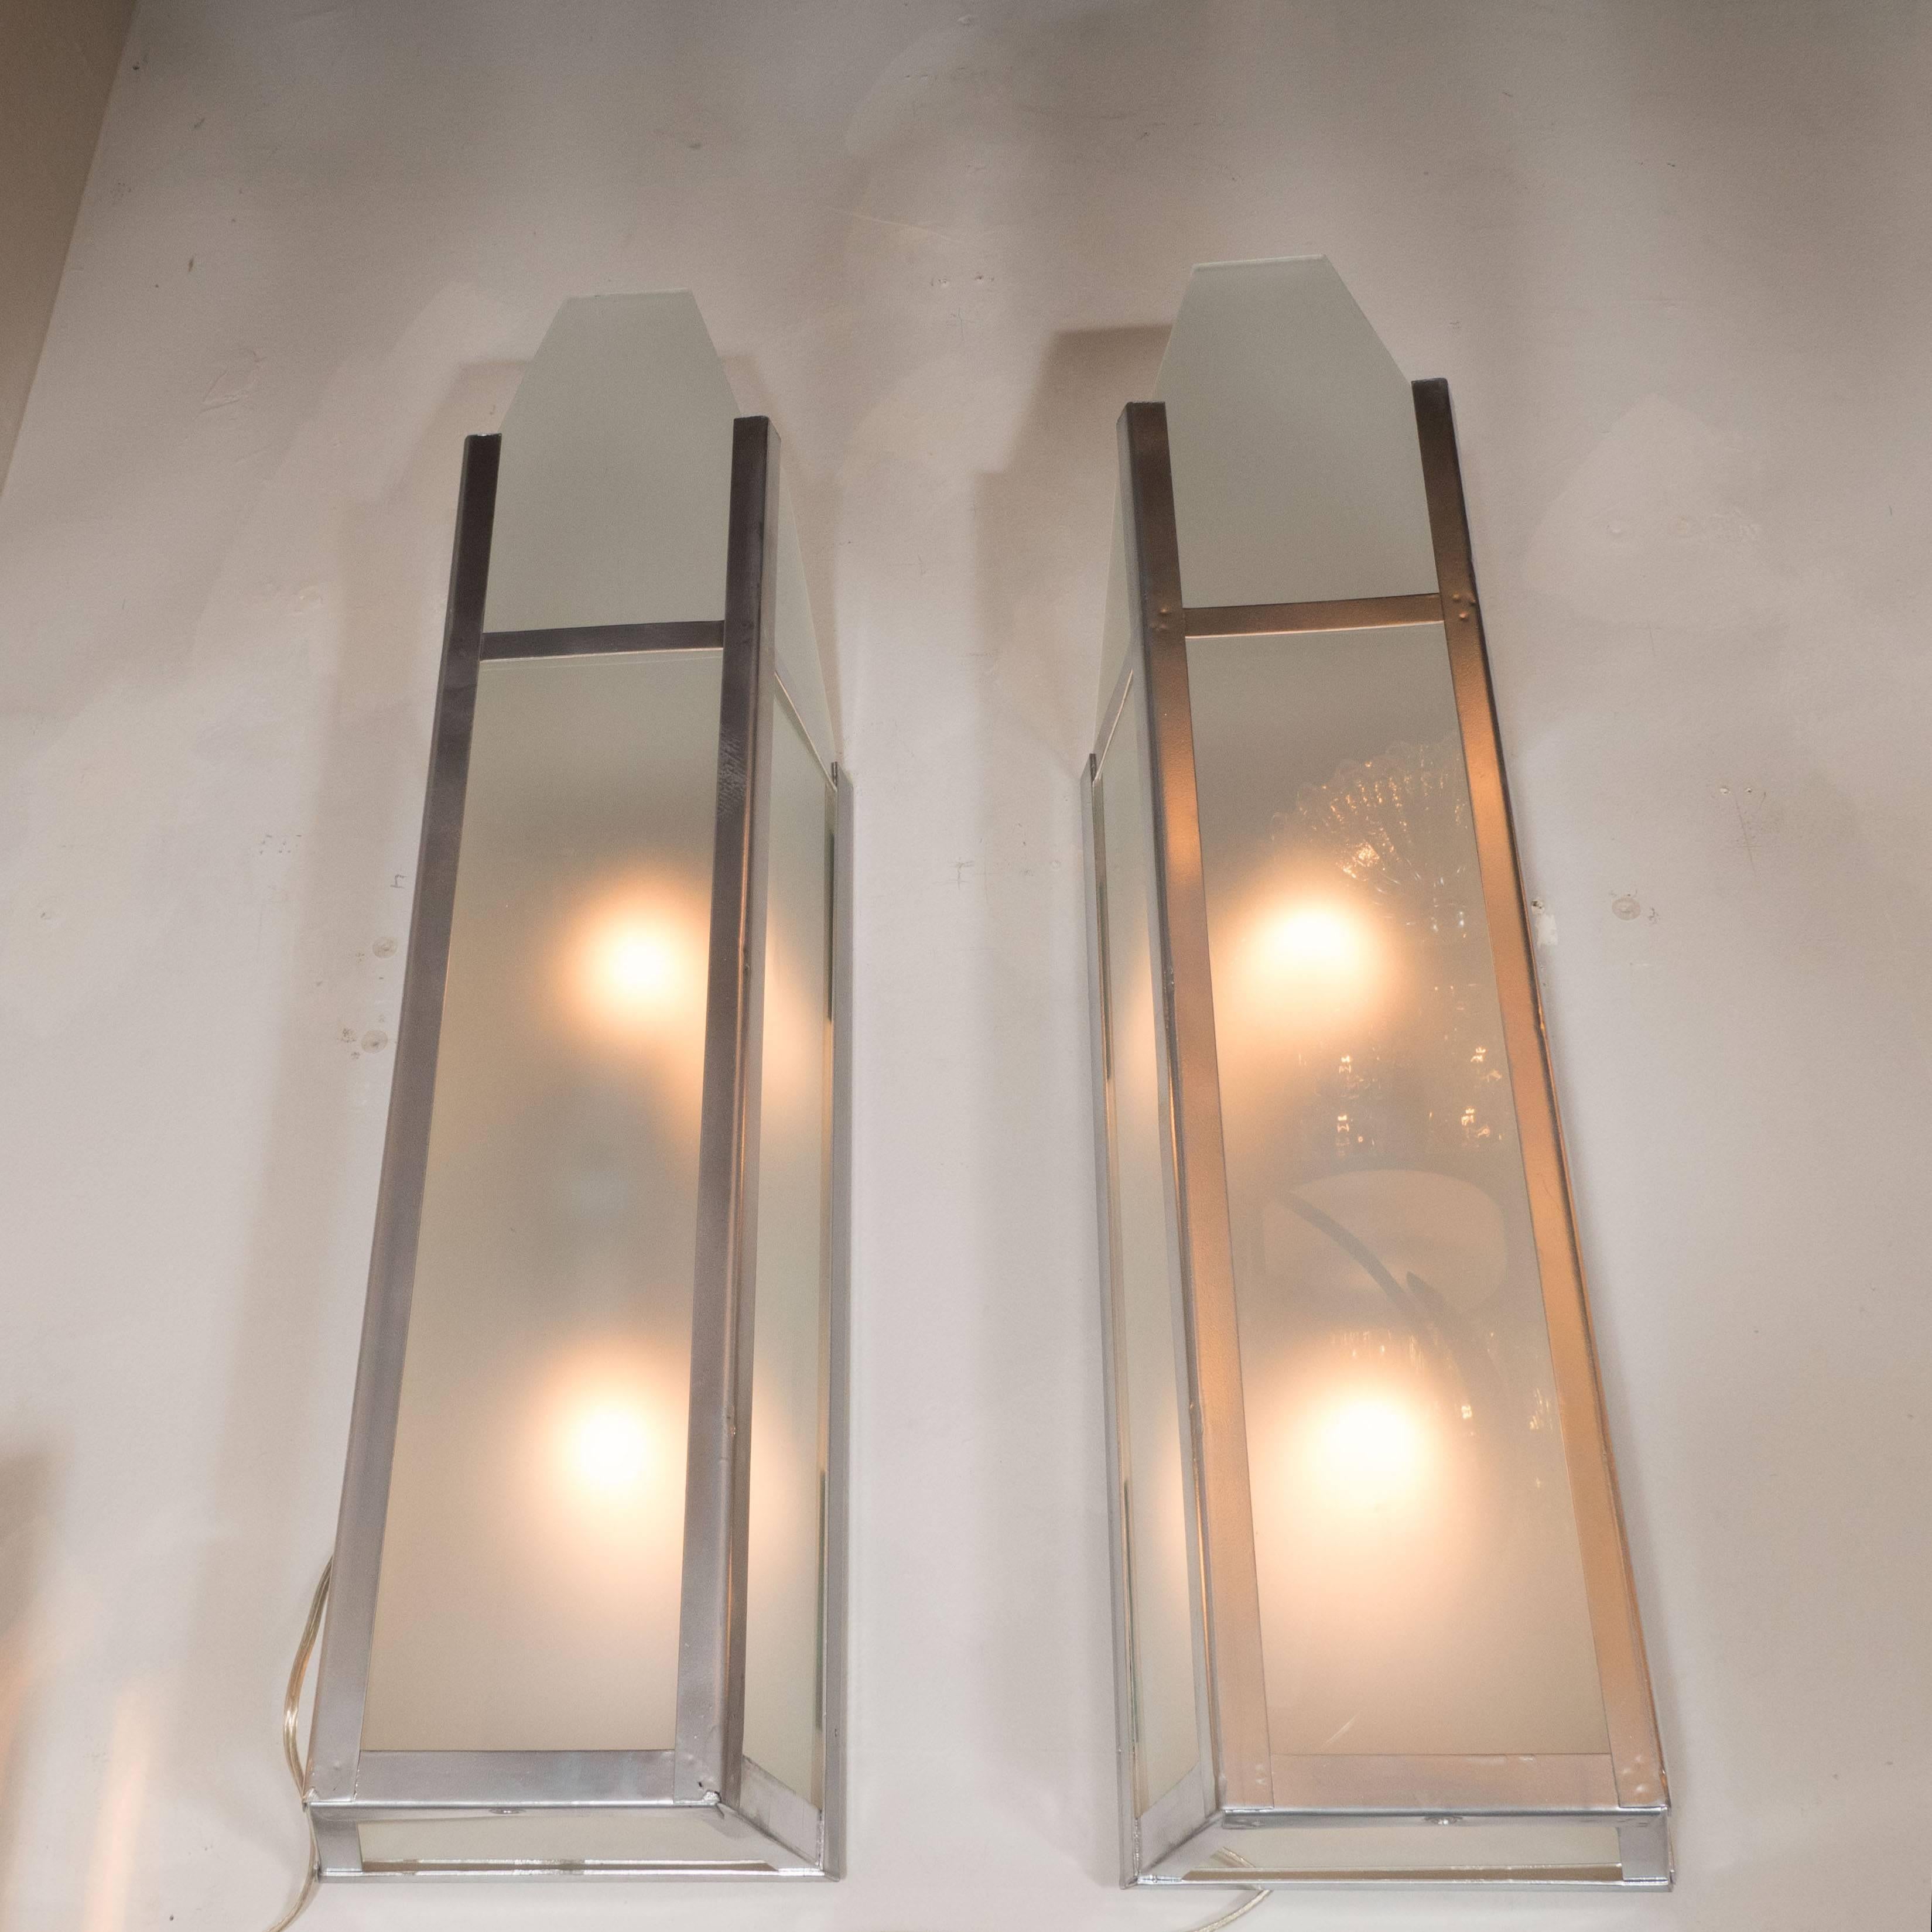 This sophisticated pair of sconces originally hung in the in the iconic Tower Theatre in Chicago. They features a rectangular form with frosted glass shades supported by a polished aluminum frame. With their skyscraper style design and industrial